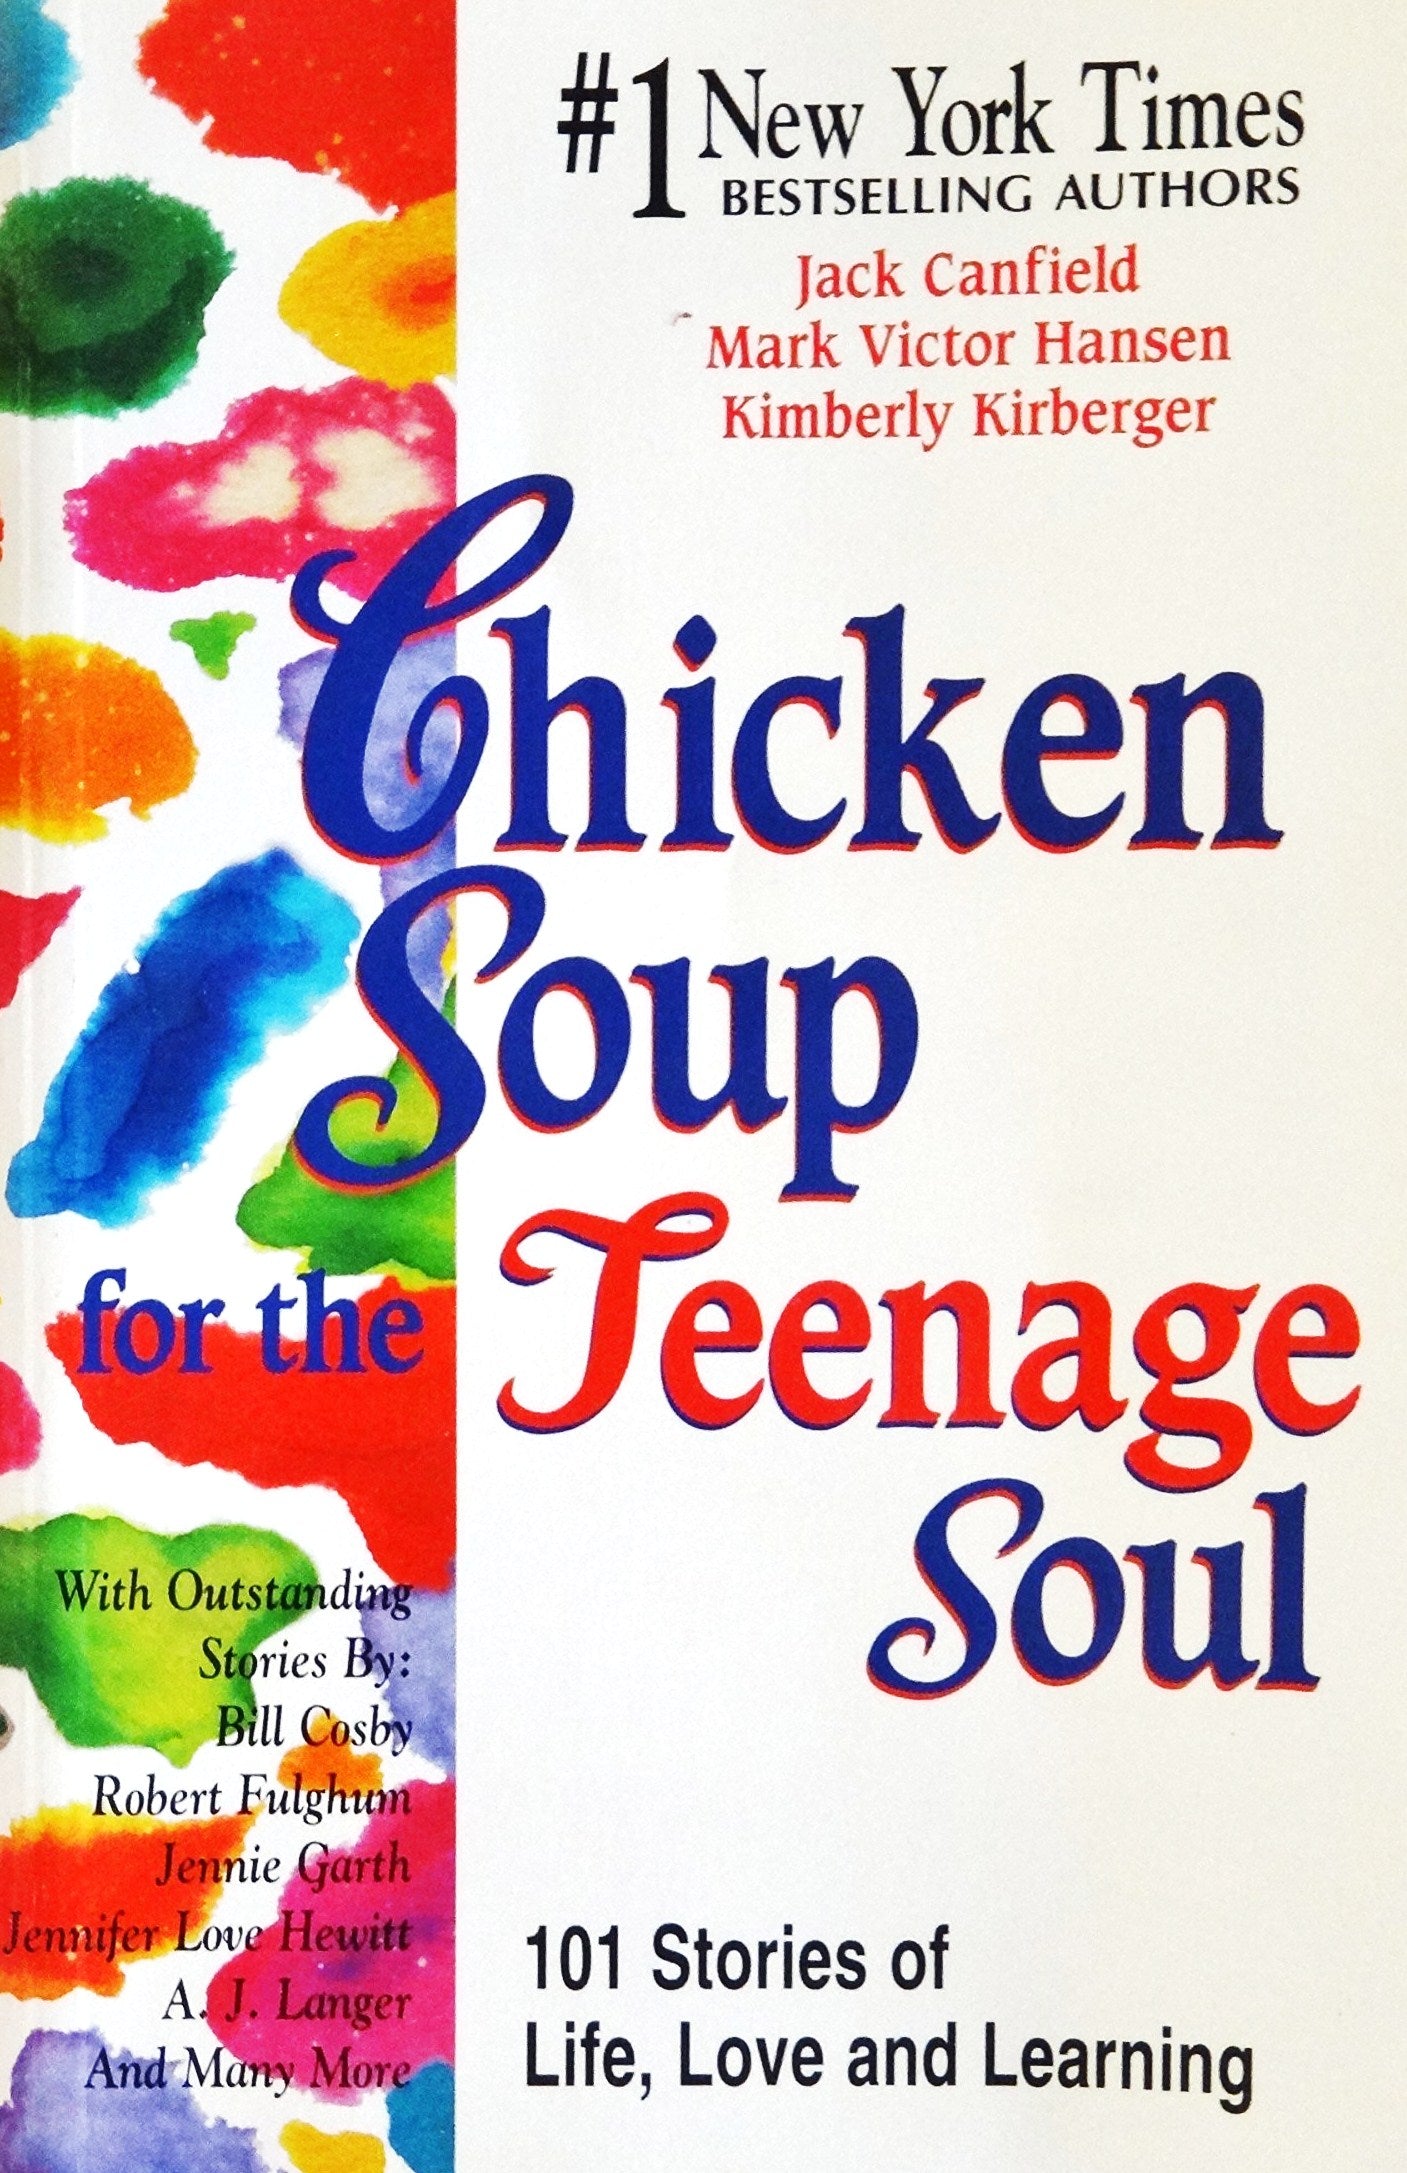 Livre ISBN 0439078415 Chicken Soup : Chicken Soup for the Teenage Soul (Jack Canfield)